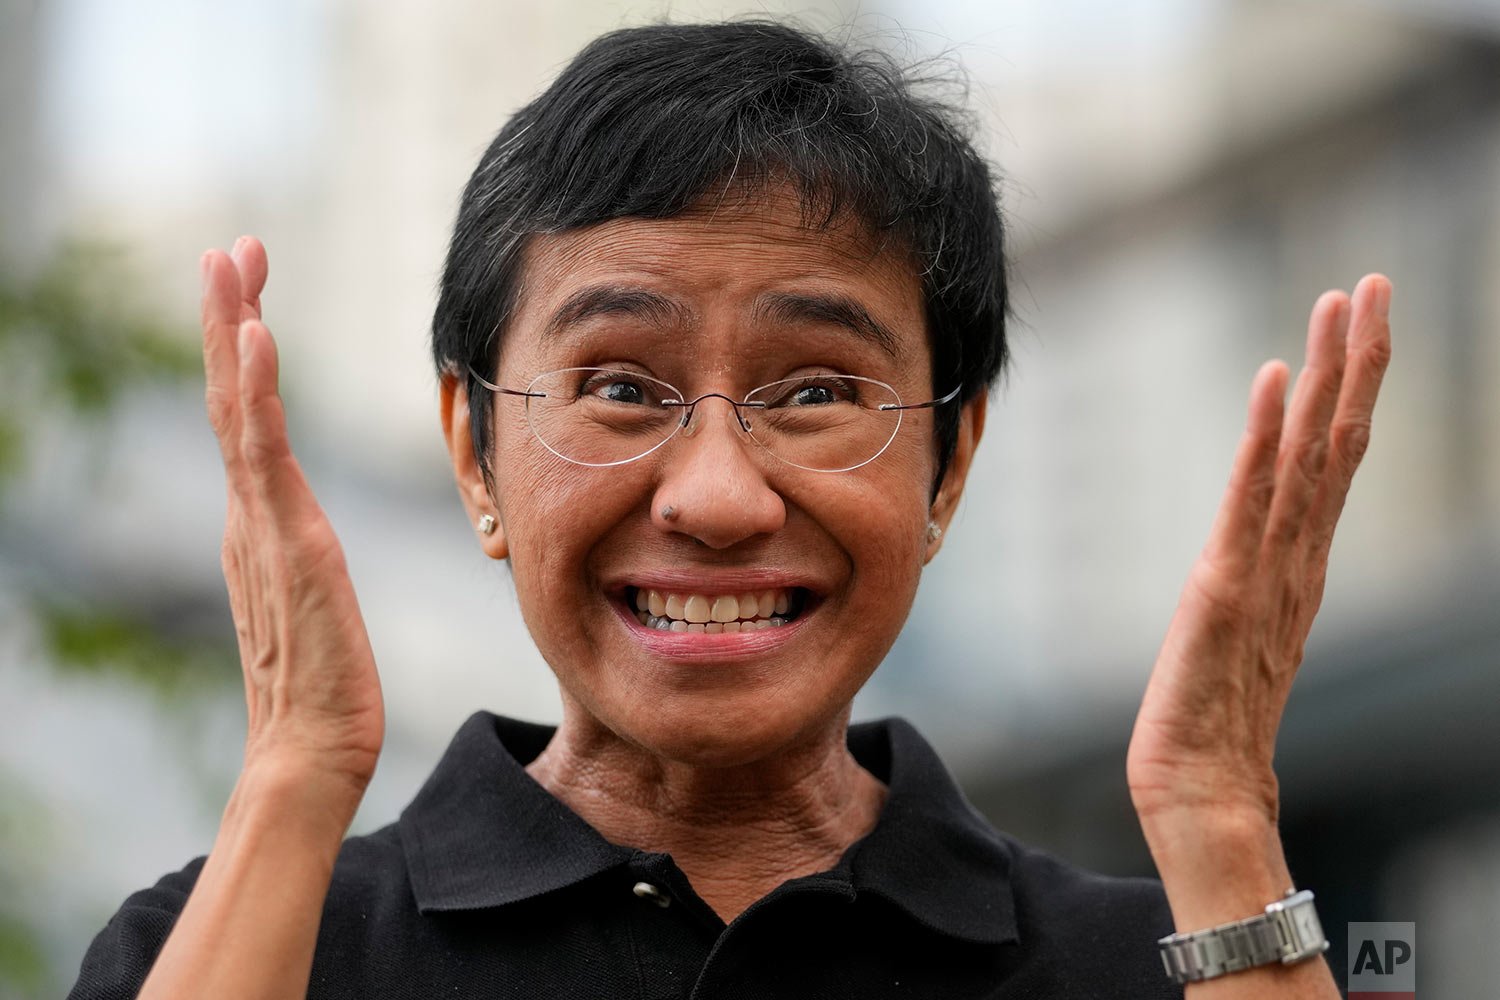  Rappler CEO and Executive Editor Maria Ressa reacts during an interview at a restaurant in Taguig city, Philippines on Saturday, Oct. 9, 2021, after she and fellow journalist Dmitry Muratov, of Russia, were awarded the Nobel Peace Prize for their fi